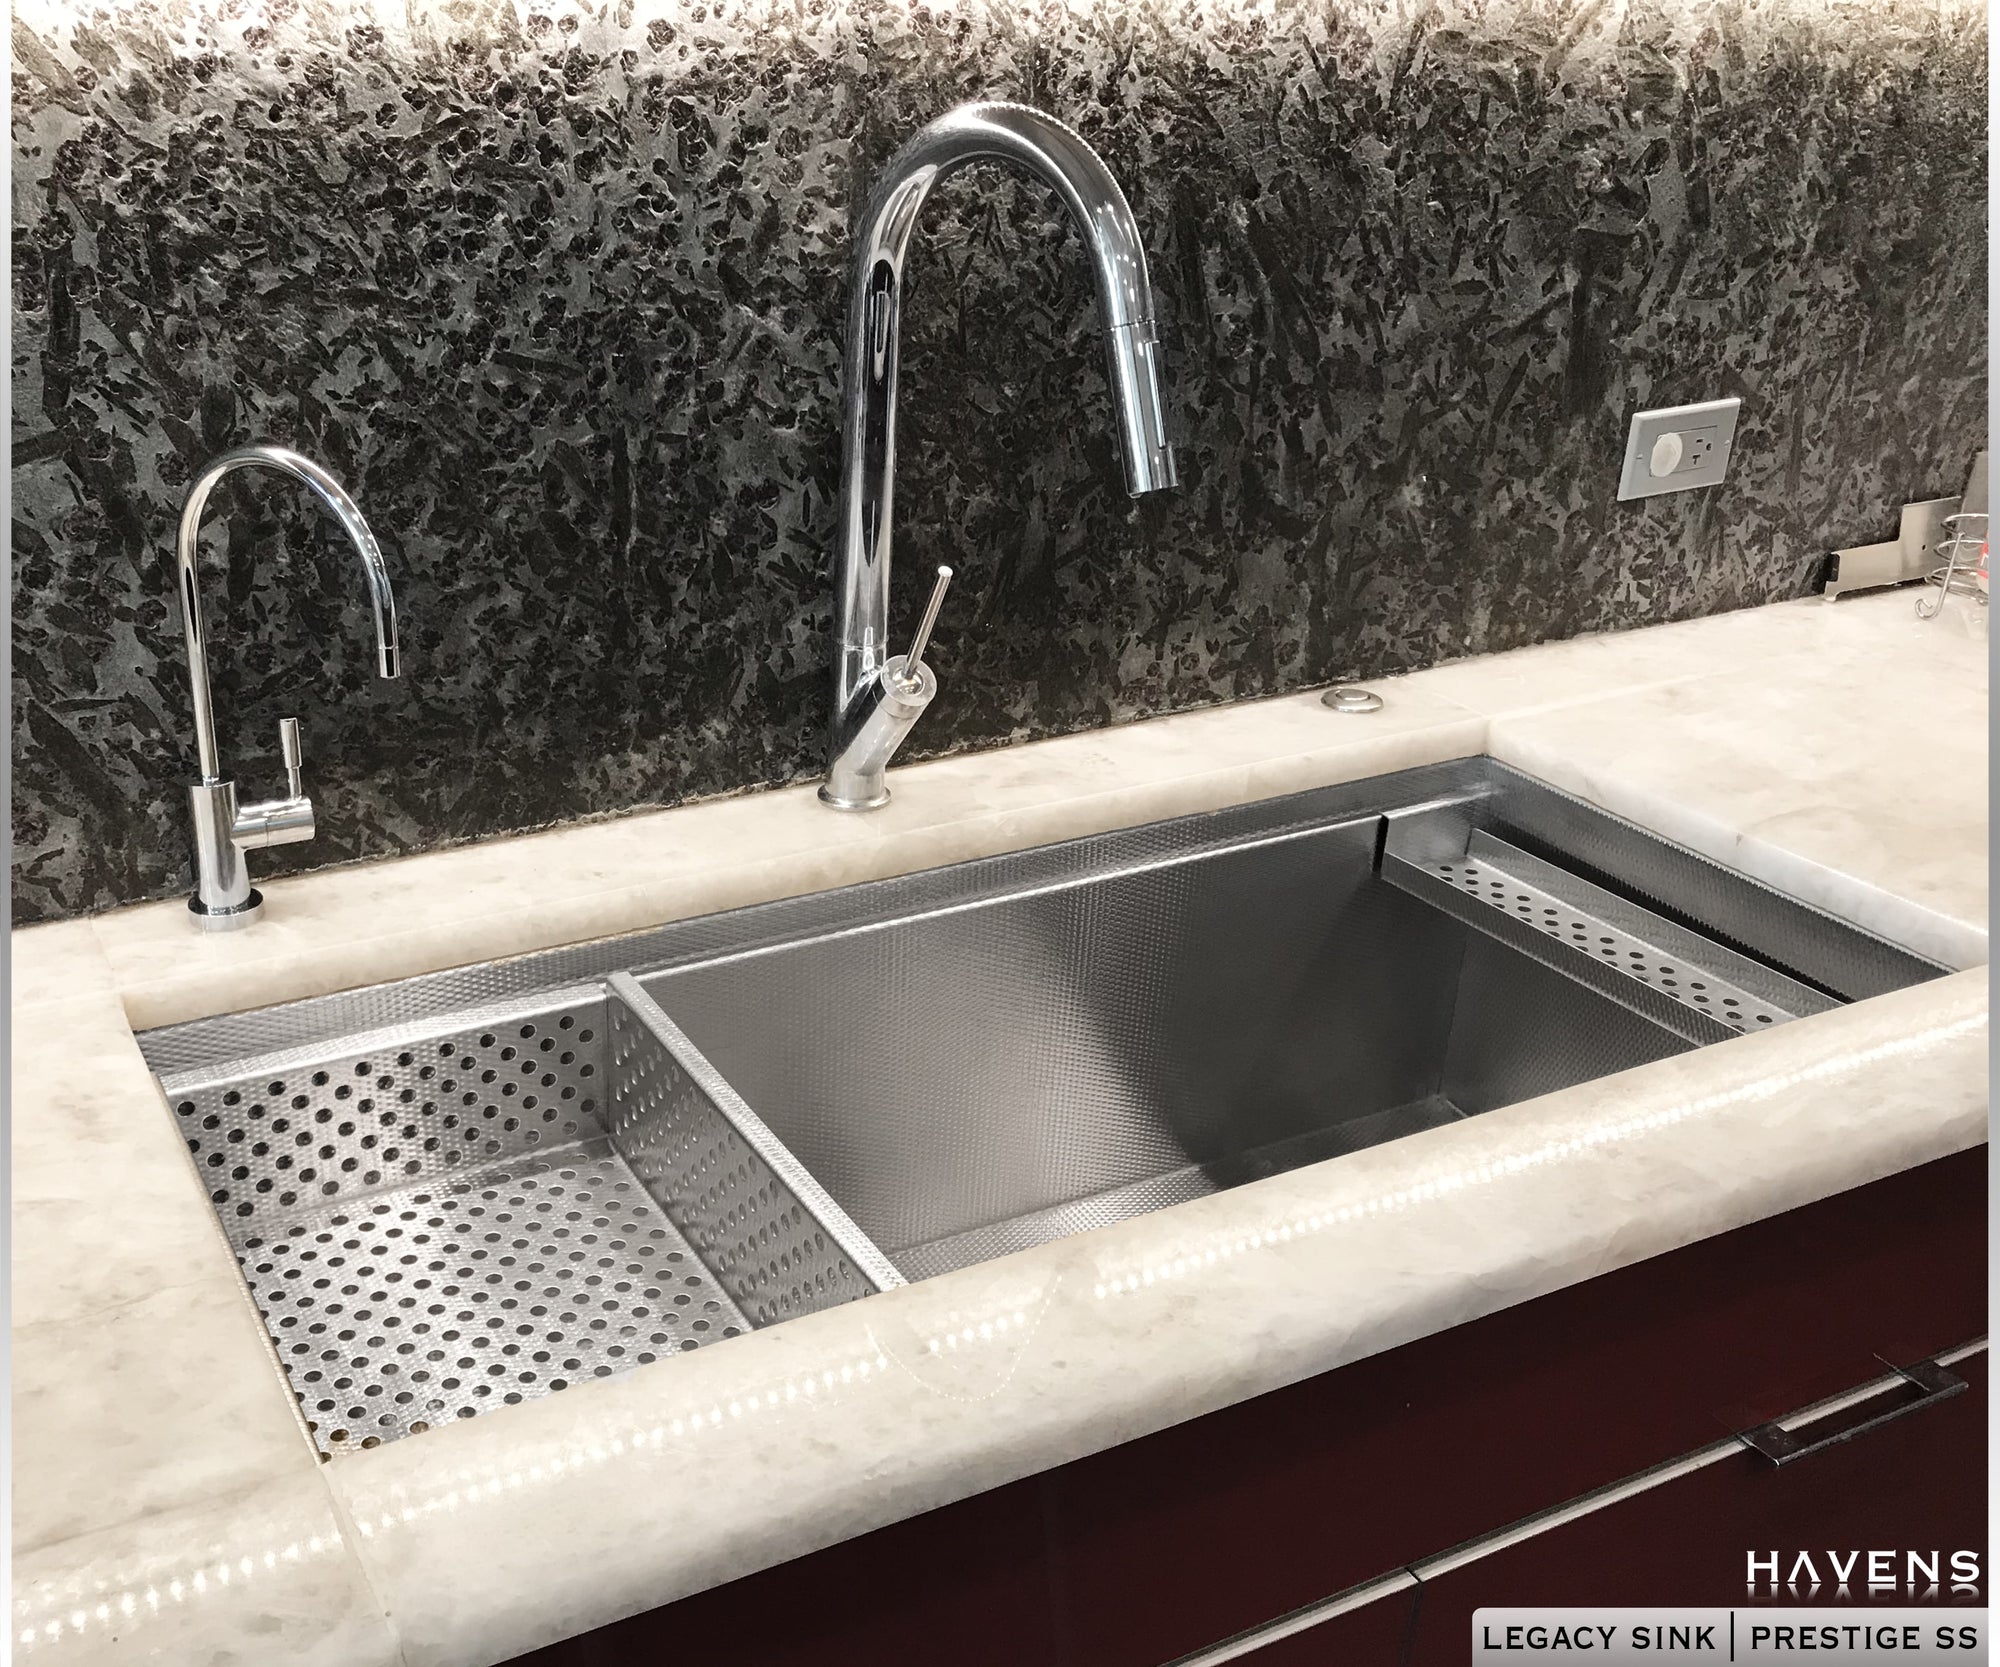 Custom Double Drainboard Sink - Stainless - Havens